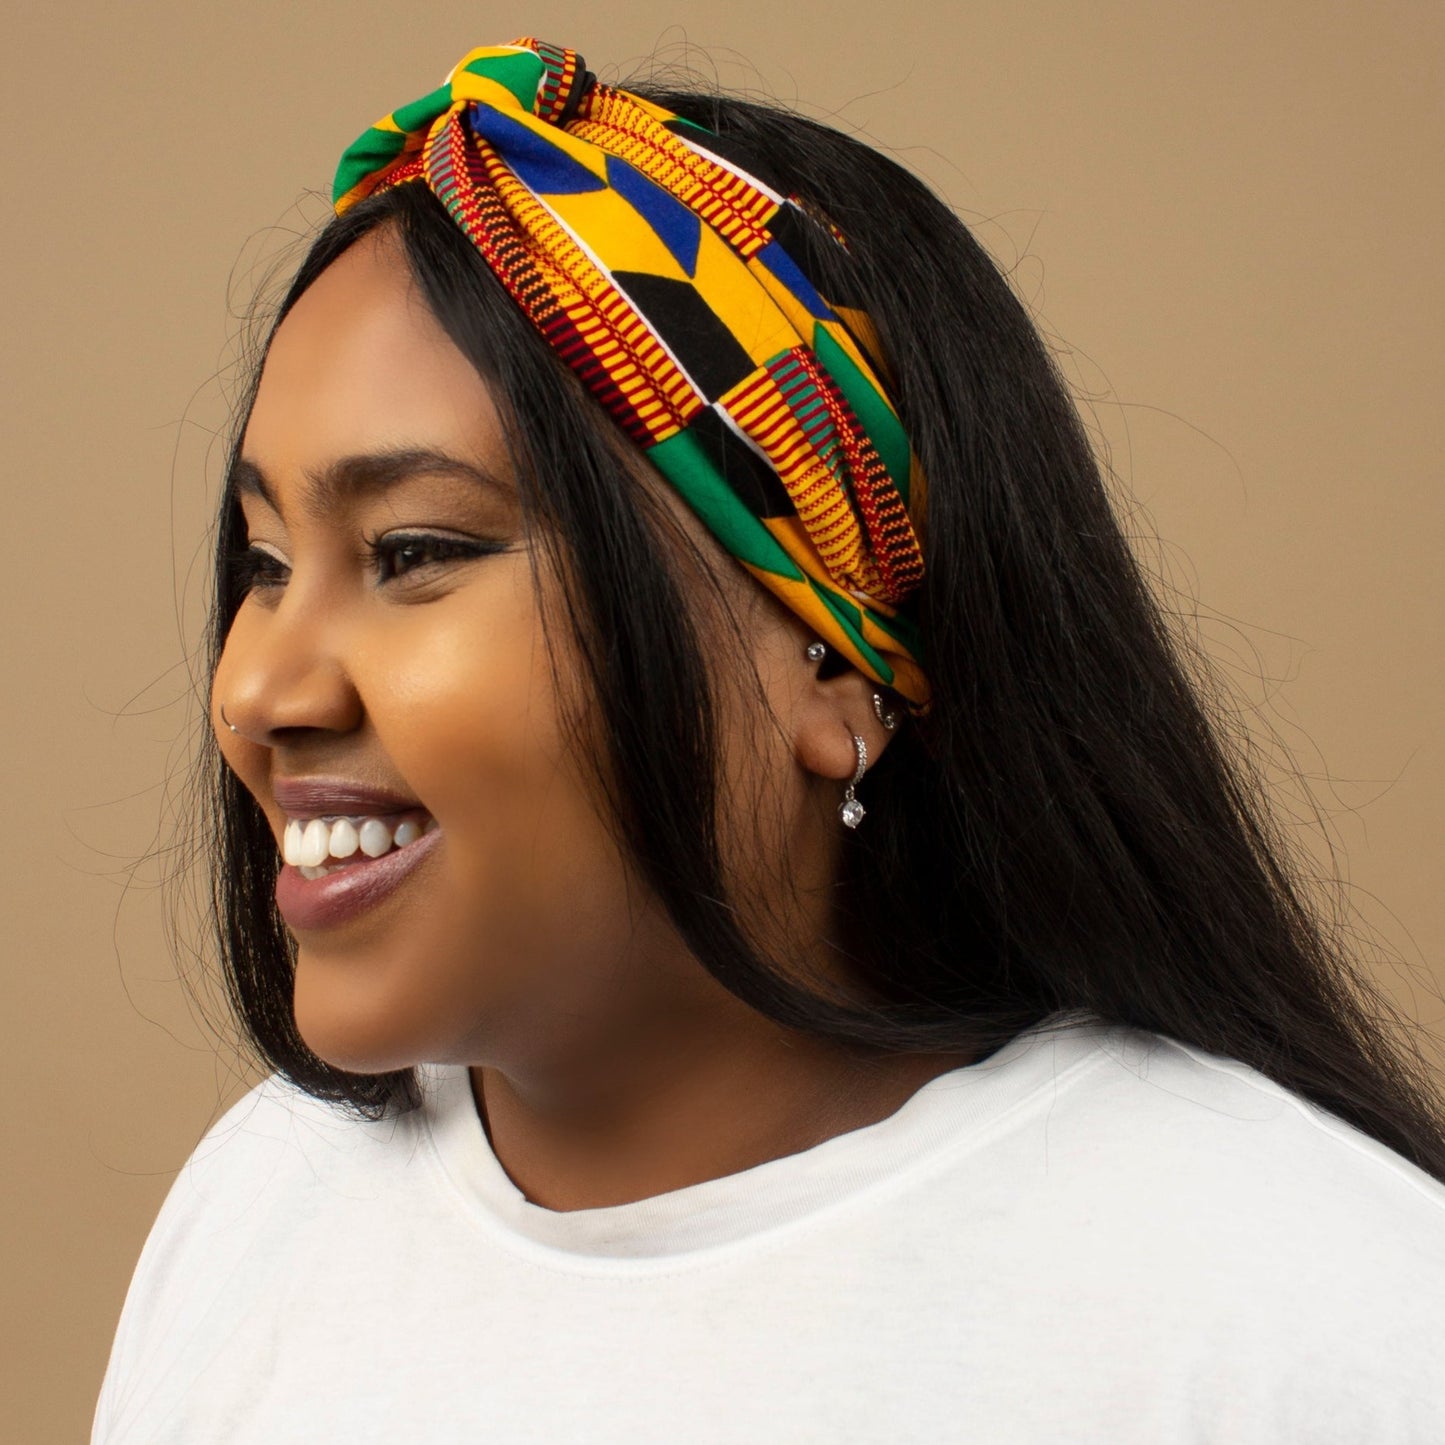 The one-sized Satin lined African Afua Kente Print on a Criss-Cross pre-tied Headband is handcrafted with sustainable cotton on a Ankara wax print in a traditional geometric multi-coloured Kente pattern. Designed in England Made in Ghana.